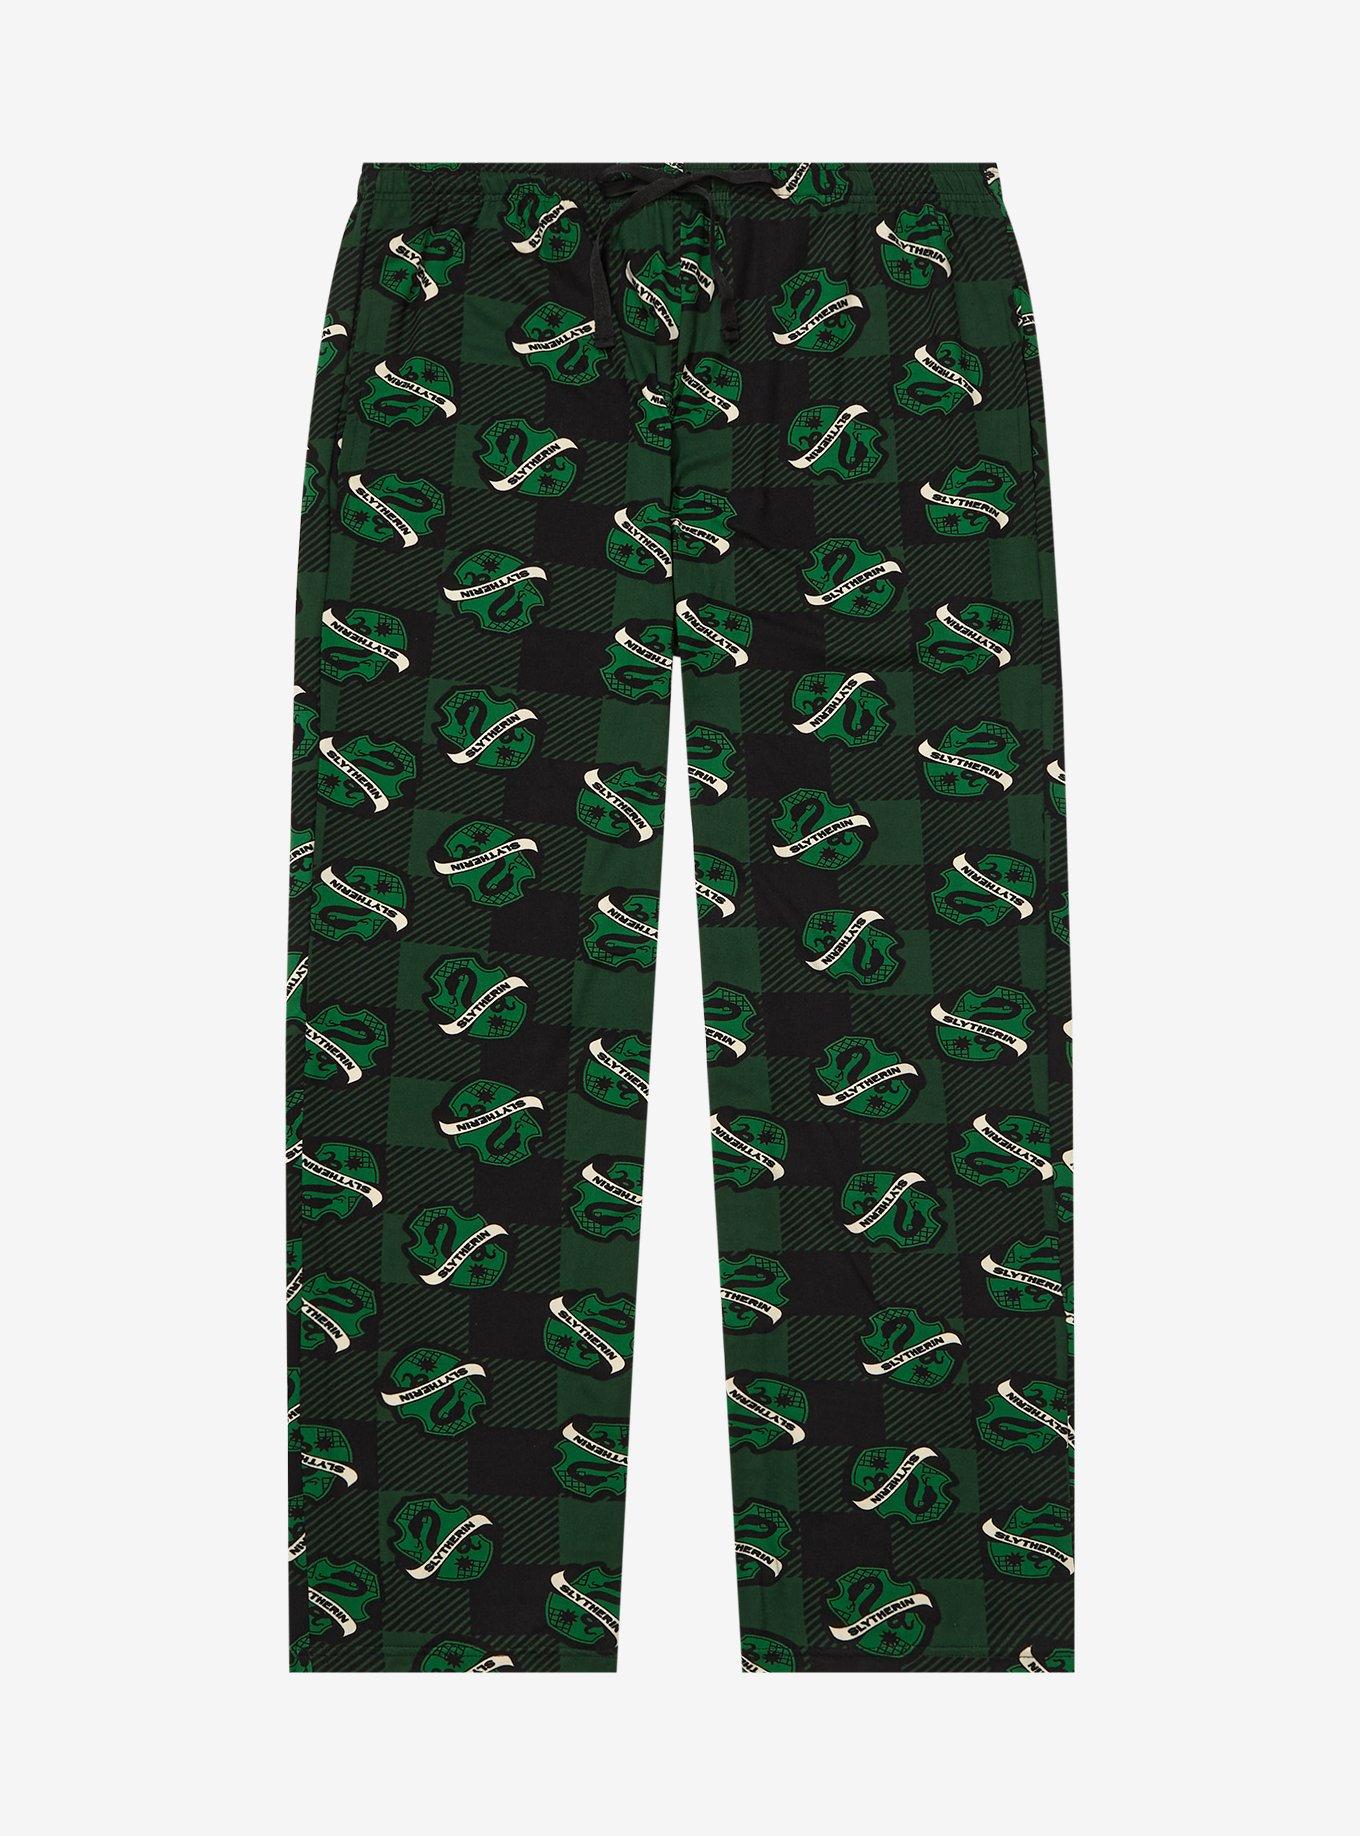 Harry Potter Plaid Slytherin Allover Print Plus Size Sleep Pants - BoxLunch Exclusive, GREEN, hi-res